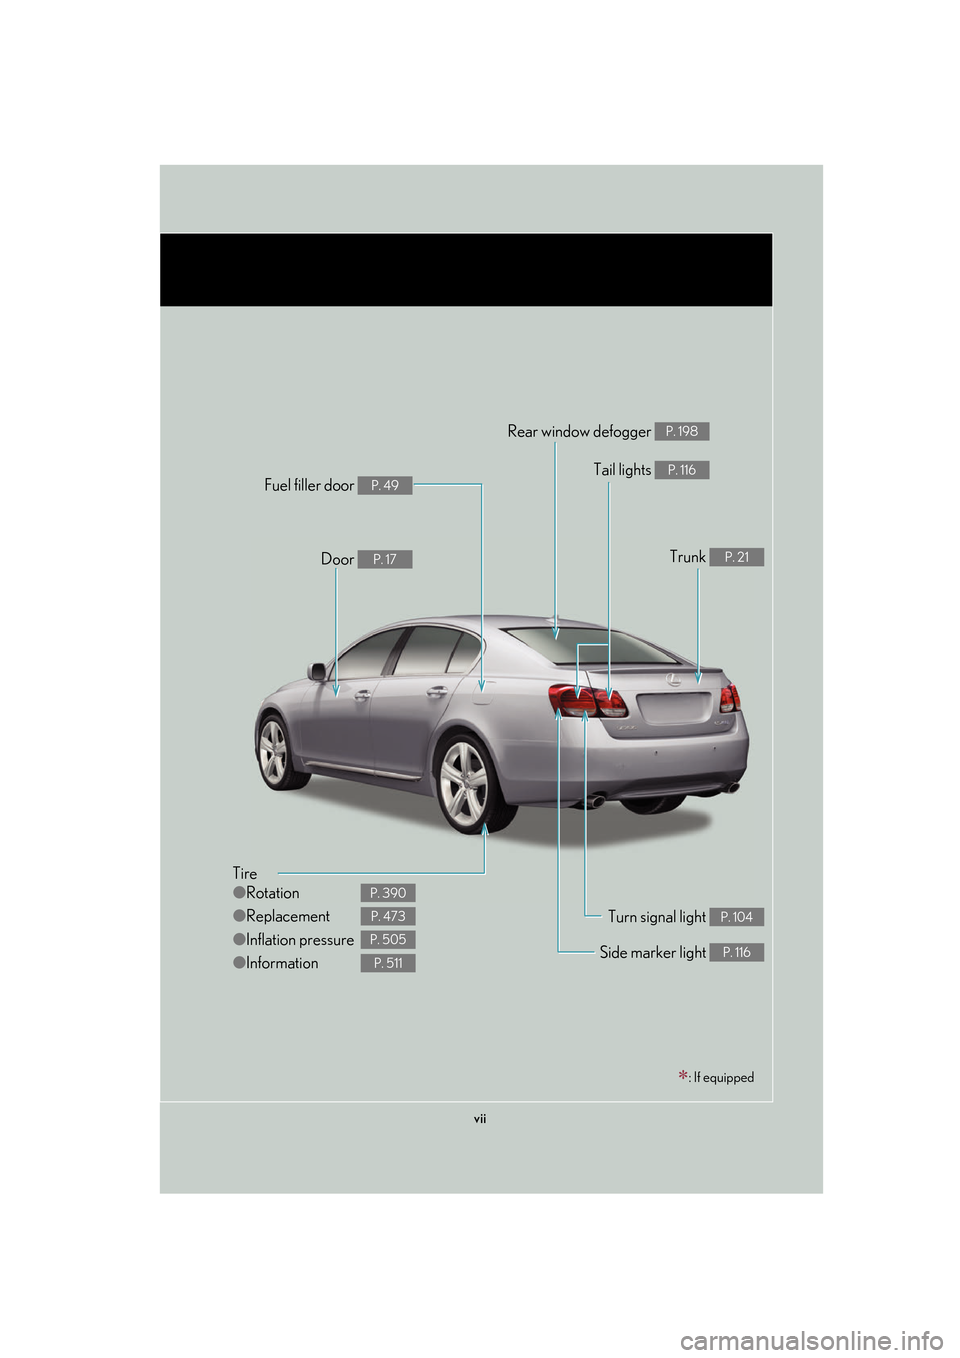 Lexus GS350 2007  Anti-theft system / LEXUS 2007 GS430/350 OWNERS MANUAL (OM30A04U) vii
Tire
●Rotation
● Replacement
● Inflation pressure
● Information
P. 390
P. 473
P. 505
P. 511
Tail lights P. 116
Side marker light P. 116
Trunk P. 21
Rear window defogger P. 198
Door P. 17
F